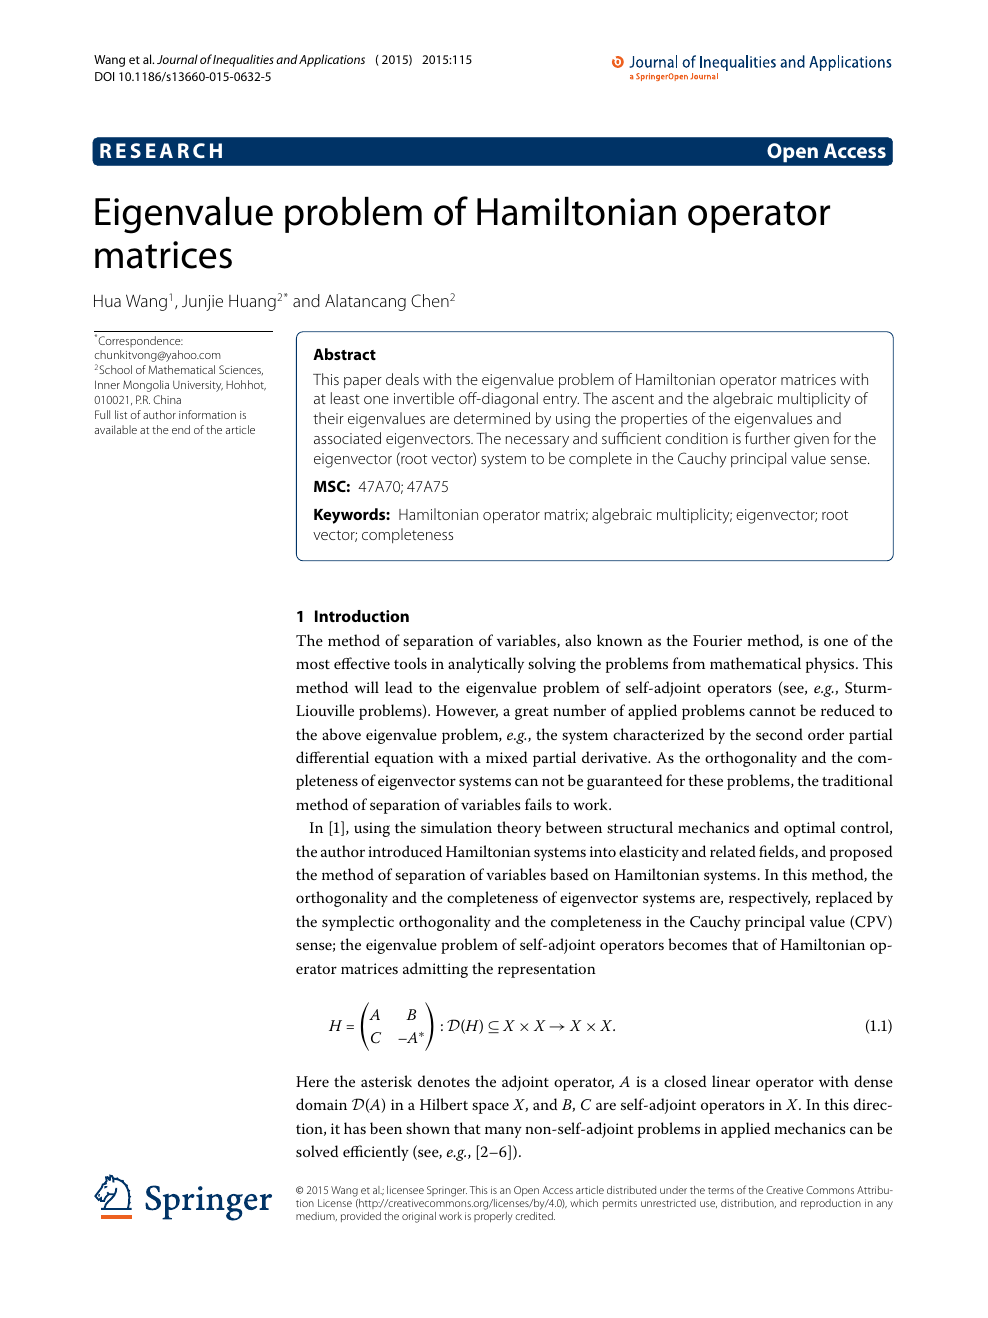 Eigenvalue Problem Of Hamiltonian Operator Matrices Topic Of Research Paper In Mathematics Download Scholarly Article Pdf And Read For Free On Cyberleninka Open Science Hub